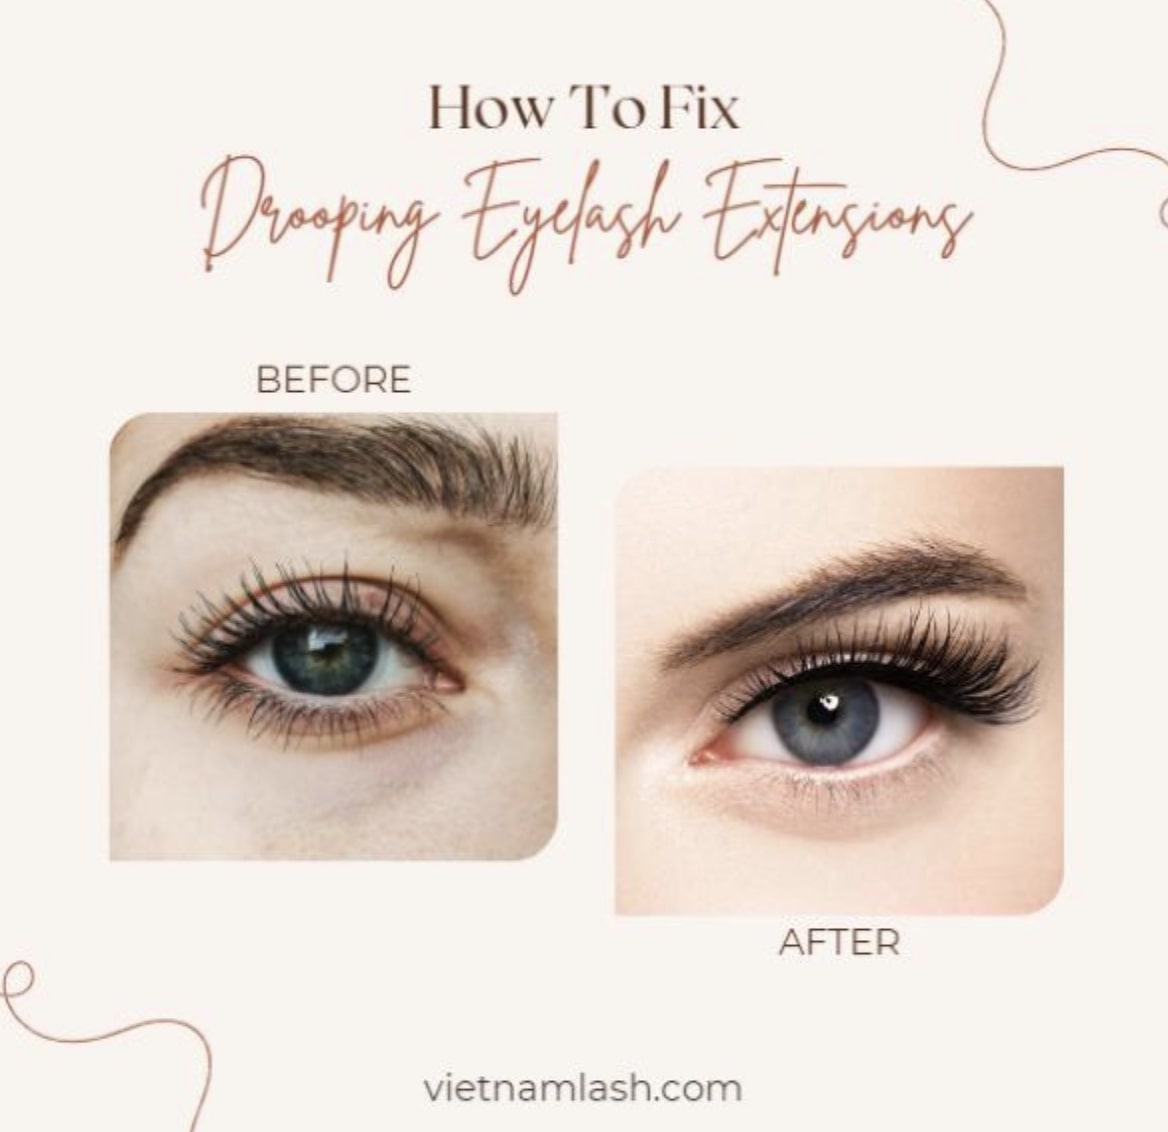 Your desired look can be compromised due to droopy lash extensions